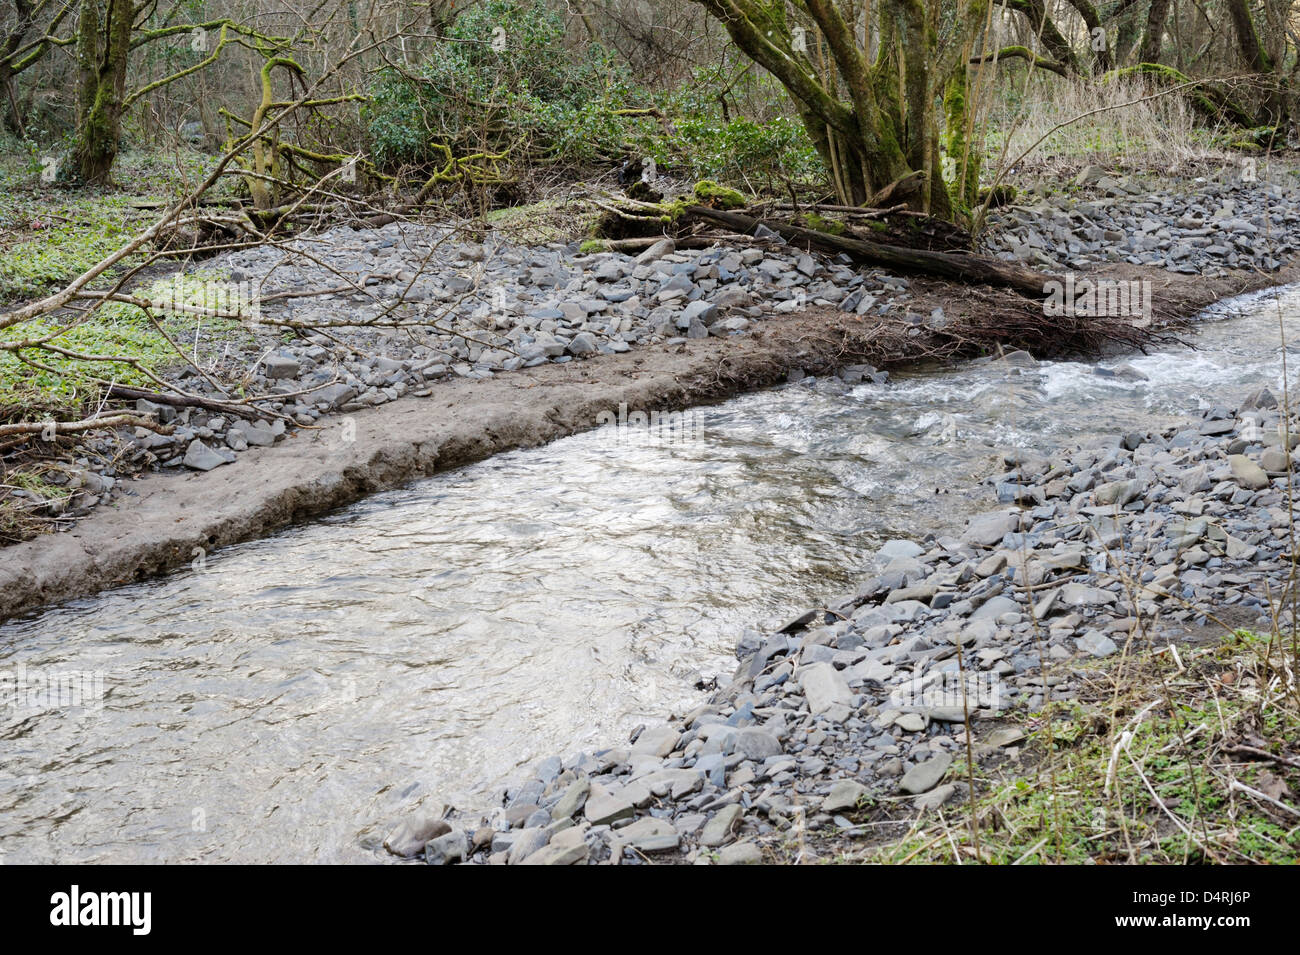 The River Wyre cuts a new course through recent flood deposits overlying an historical clay layer, Wales. Stock Photo